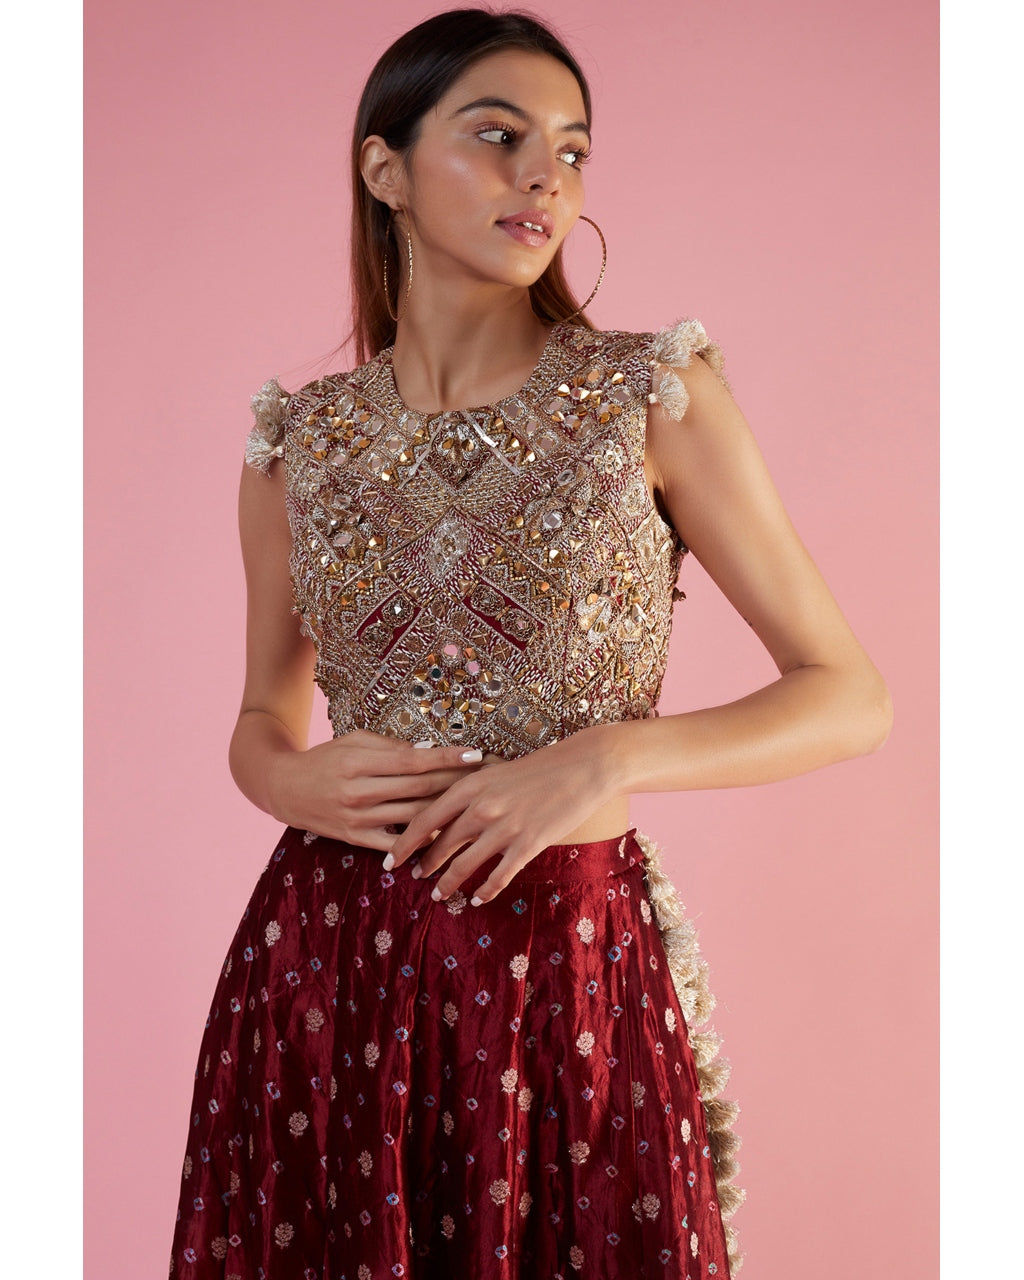 Maroon Embroidered Choli And Skirt With Attached Pants Set